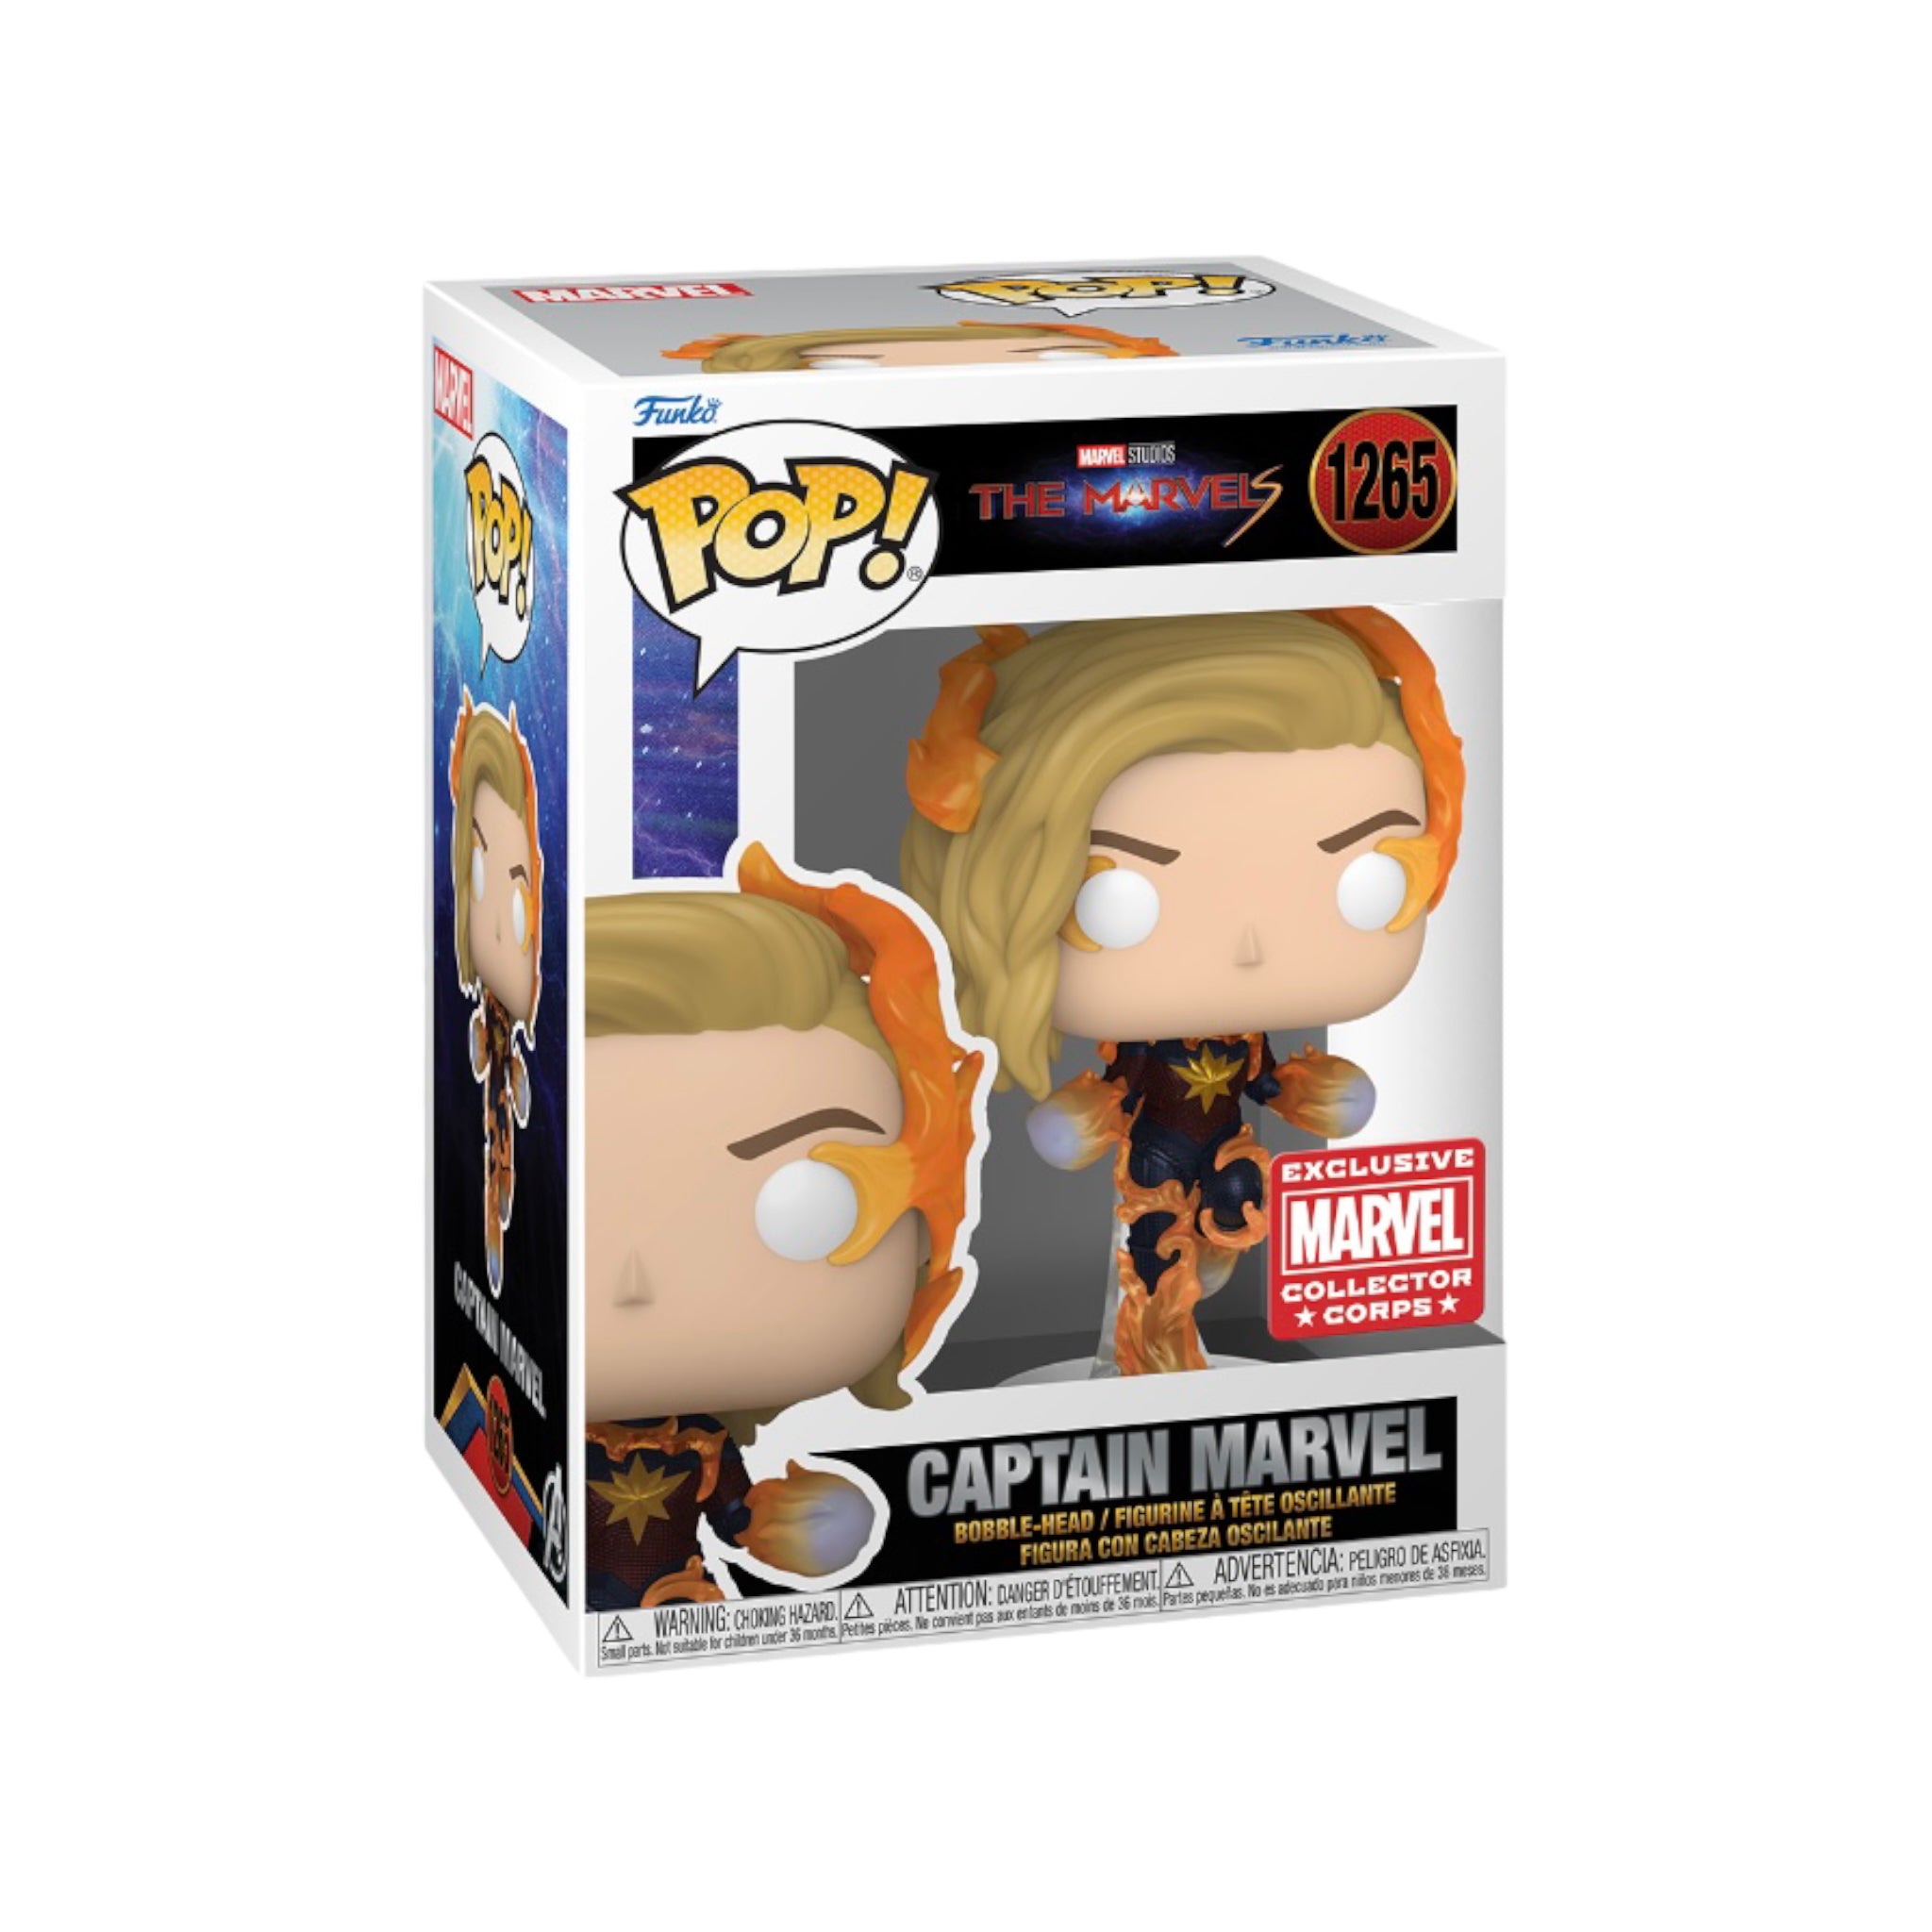 Captain Marvel #1265 (Binary) Funko Pop! - The Marvels - Marvel Collector Corps Exclusive